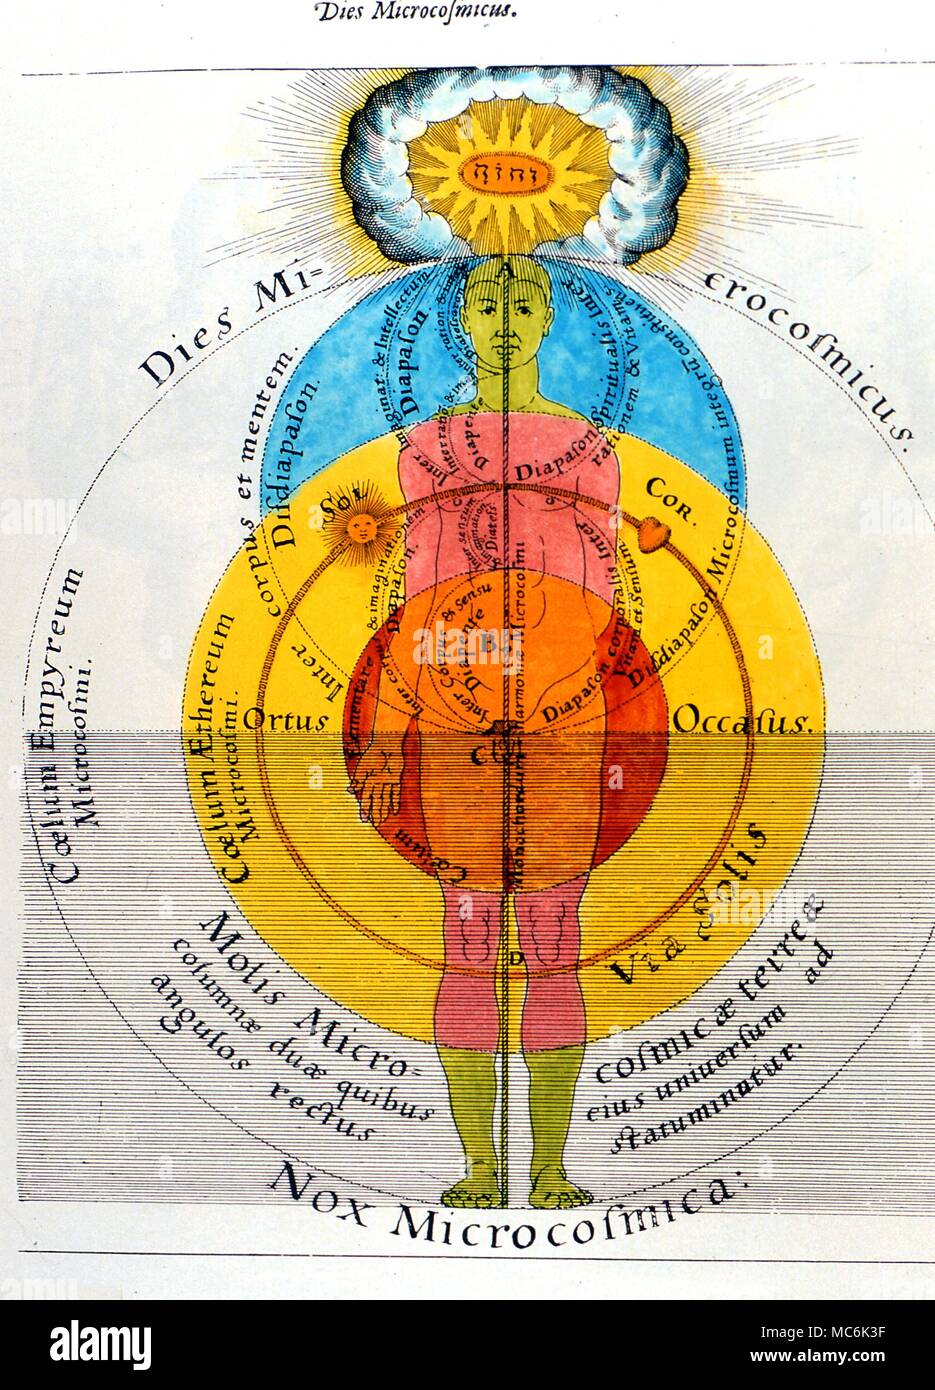 Cabbala Cosmic Man Image of Cosmic Man standing within circles that denote  Pythagorean harmonics and the courses of the planets Engraving by Thoeodore  de Bry 1619 Cabbala n : sometimes called Kabbalah